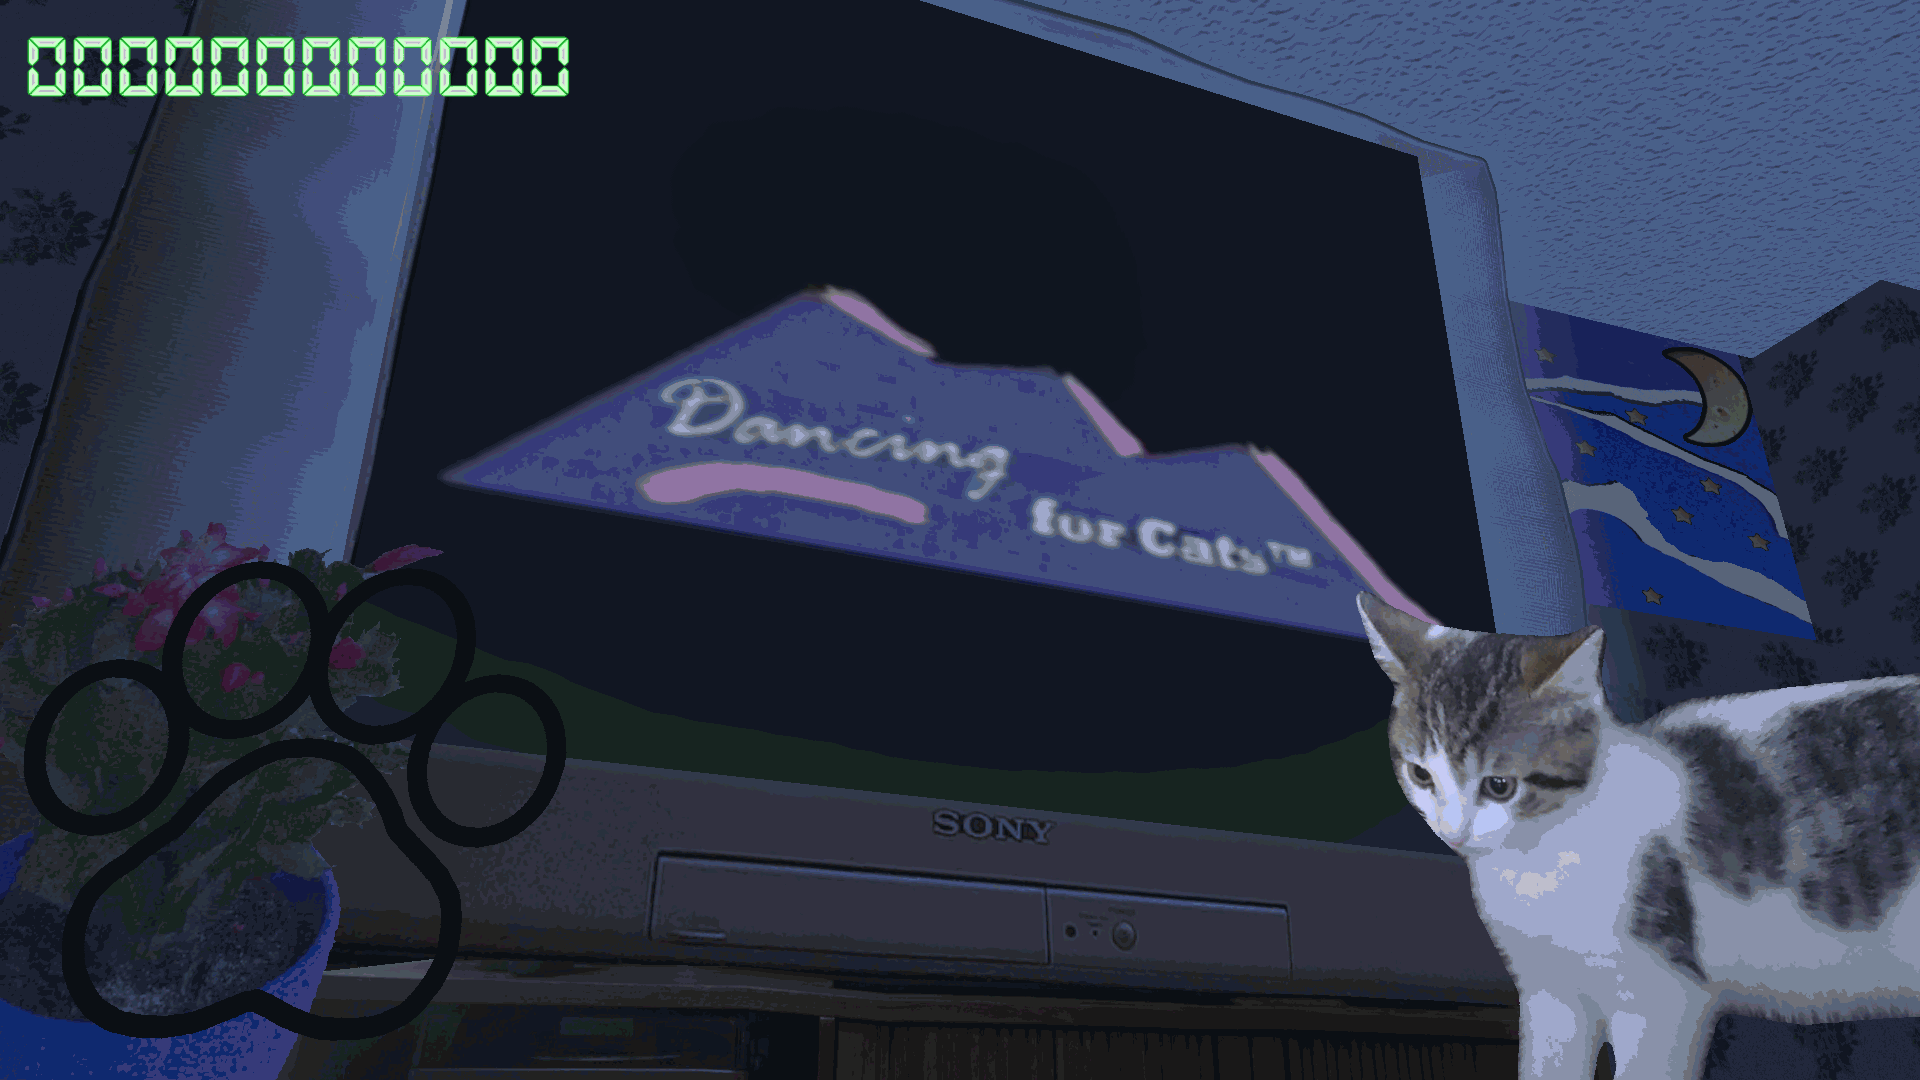 Dancing For Cats